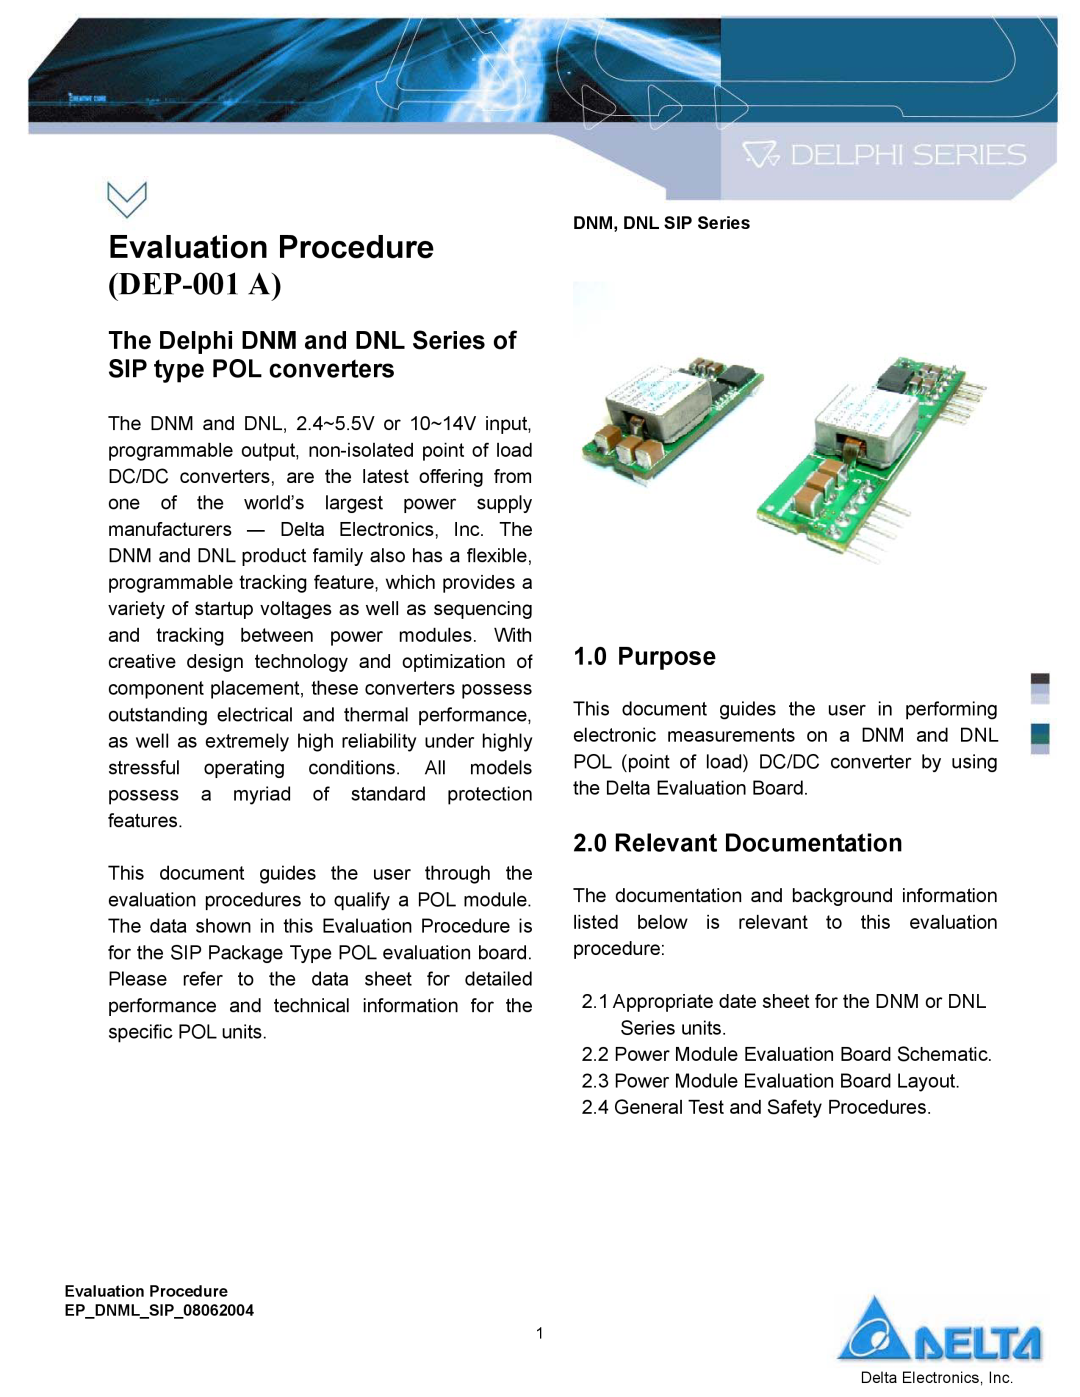 Delta Electronics manual The Delphi DNM and DNL Series of SIP type POL converters, Purpose, Relevant Documentation 